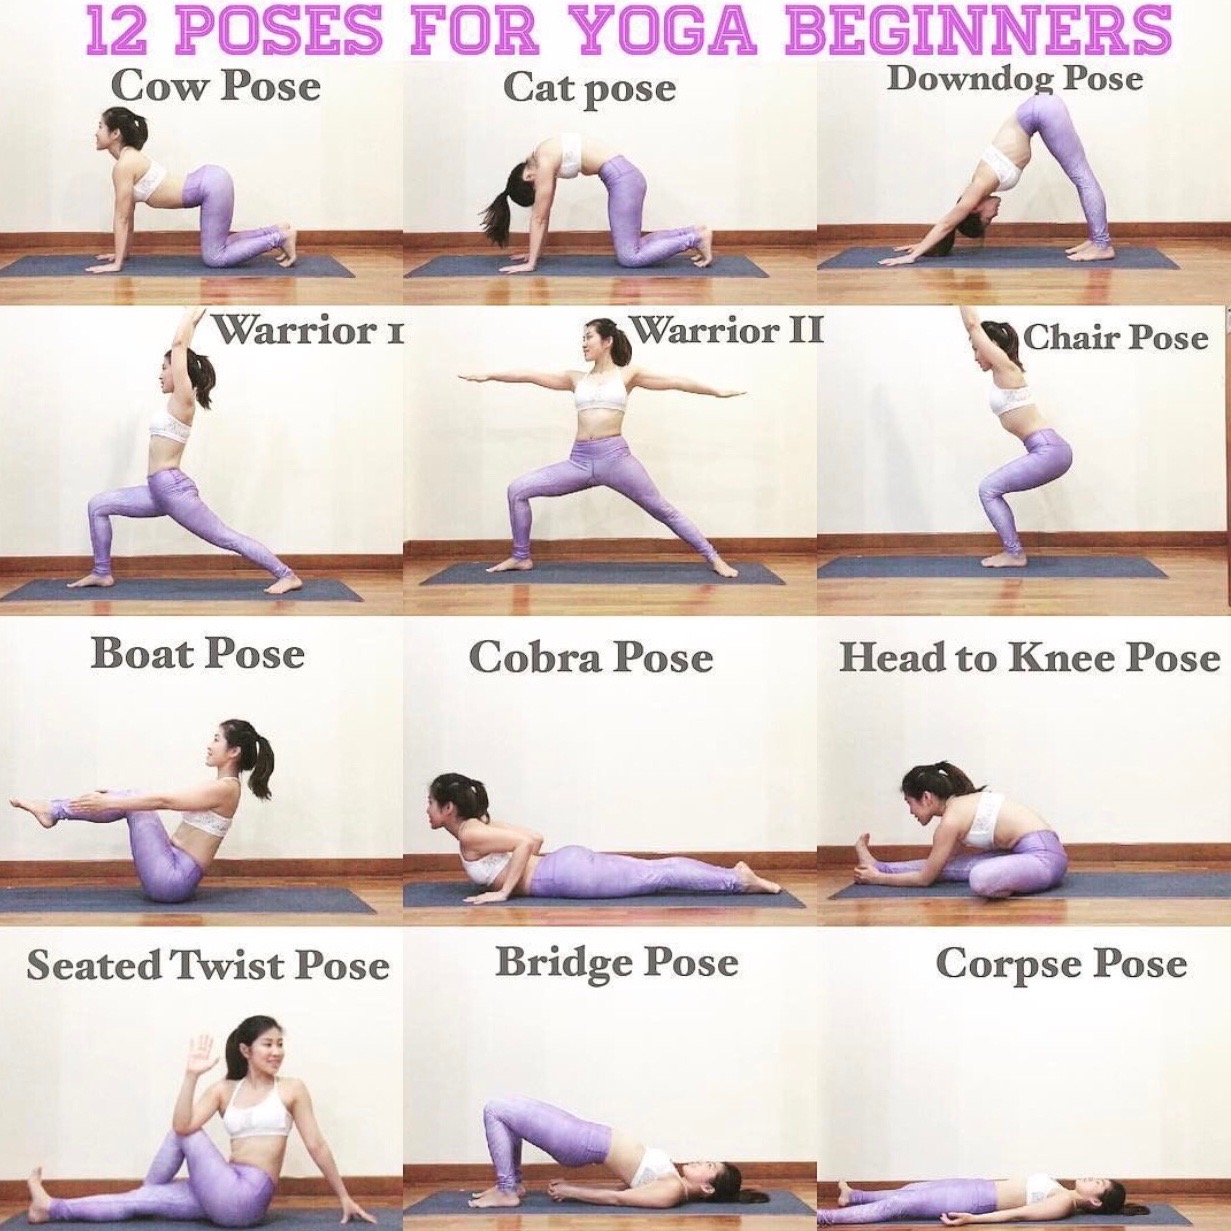 20 Yoga Poses for Complete Beginners | Basic yoga poses, Yoga for beginners,  Basic yoga